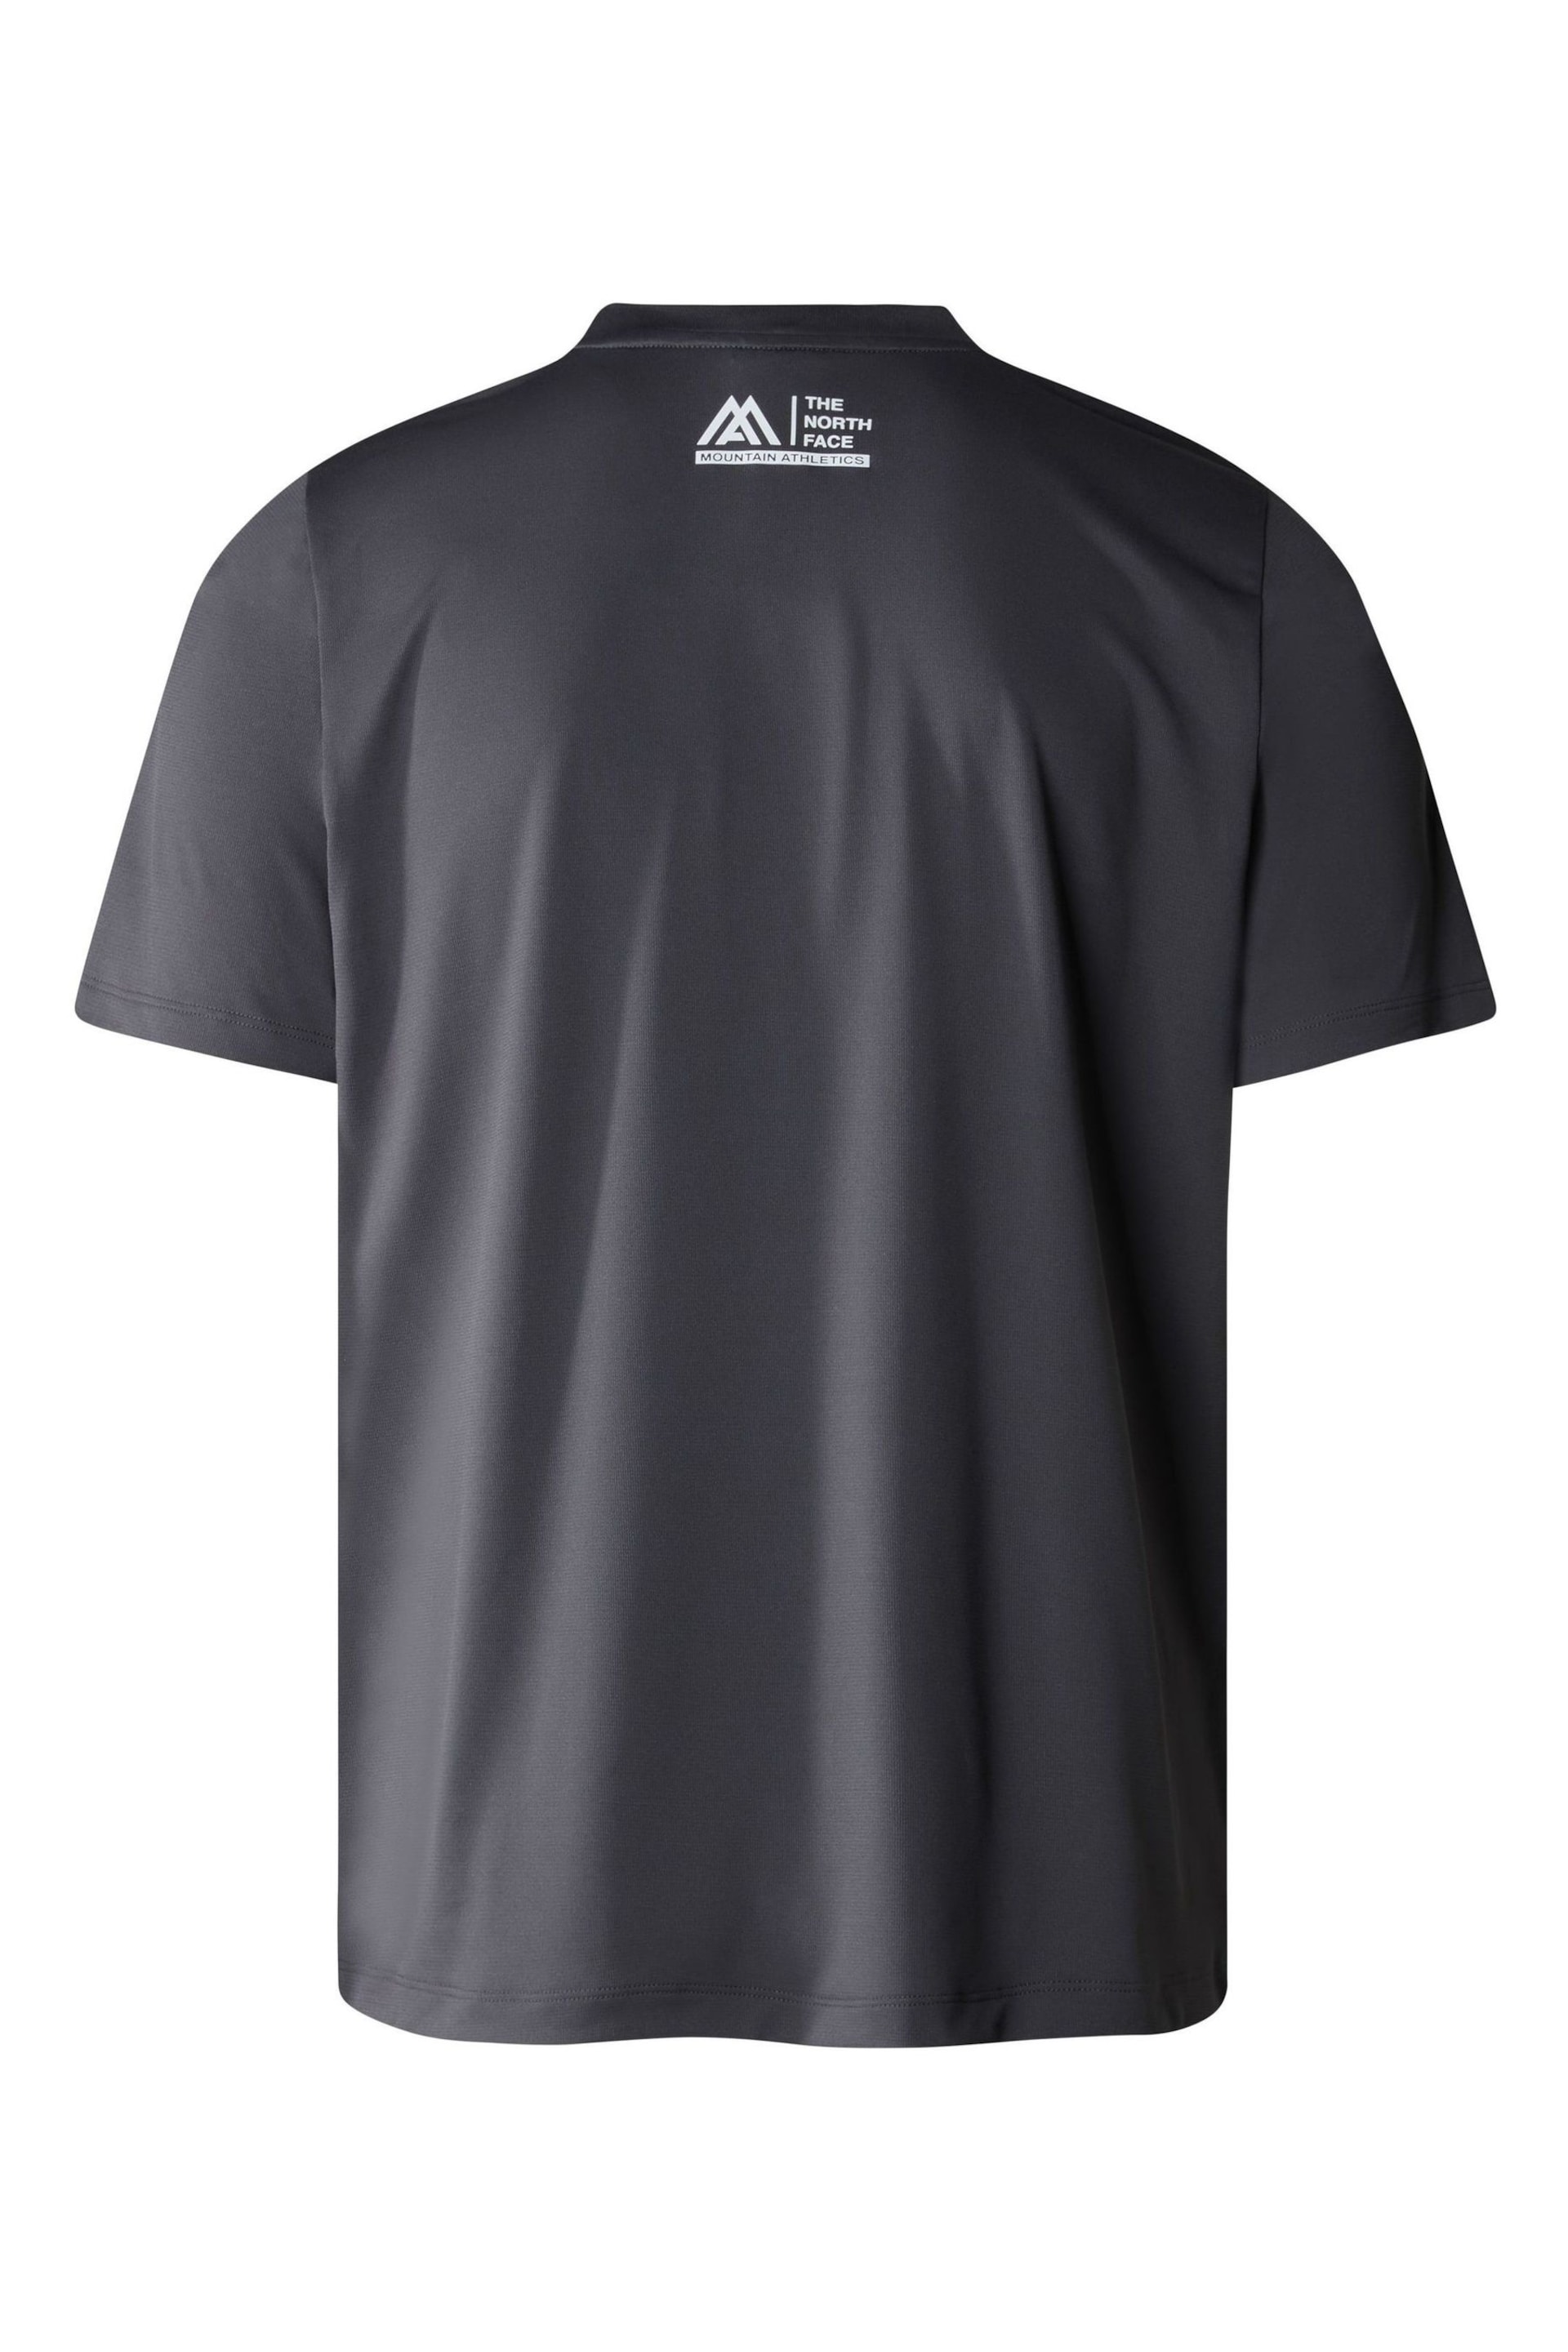 The North Face Grey Mountain Athletics Short Sleeve Graphic T-Shirt - Image 2 of 2